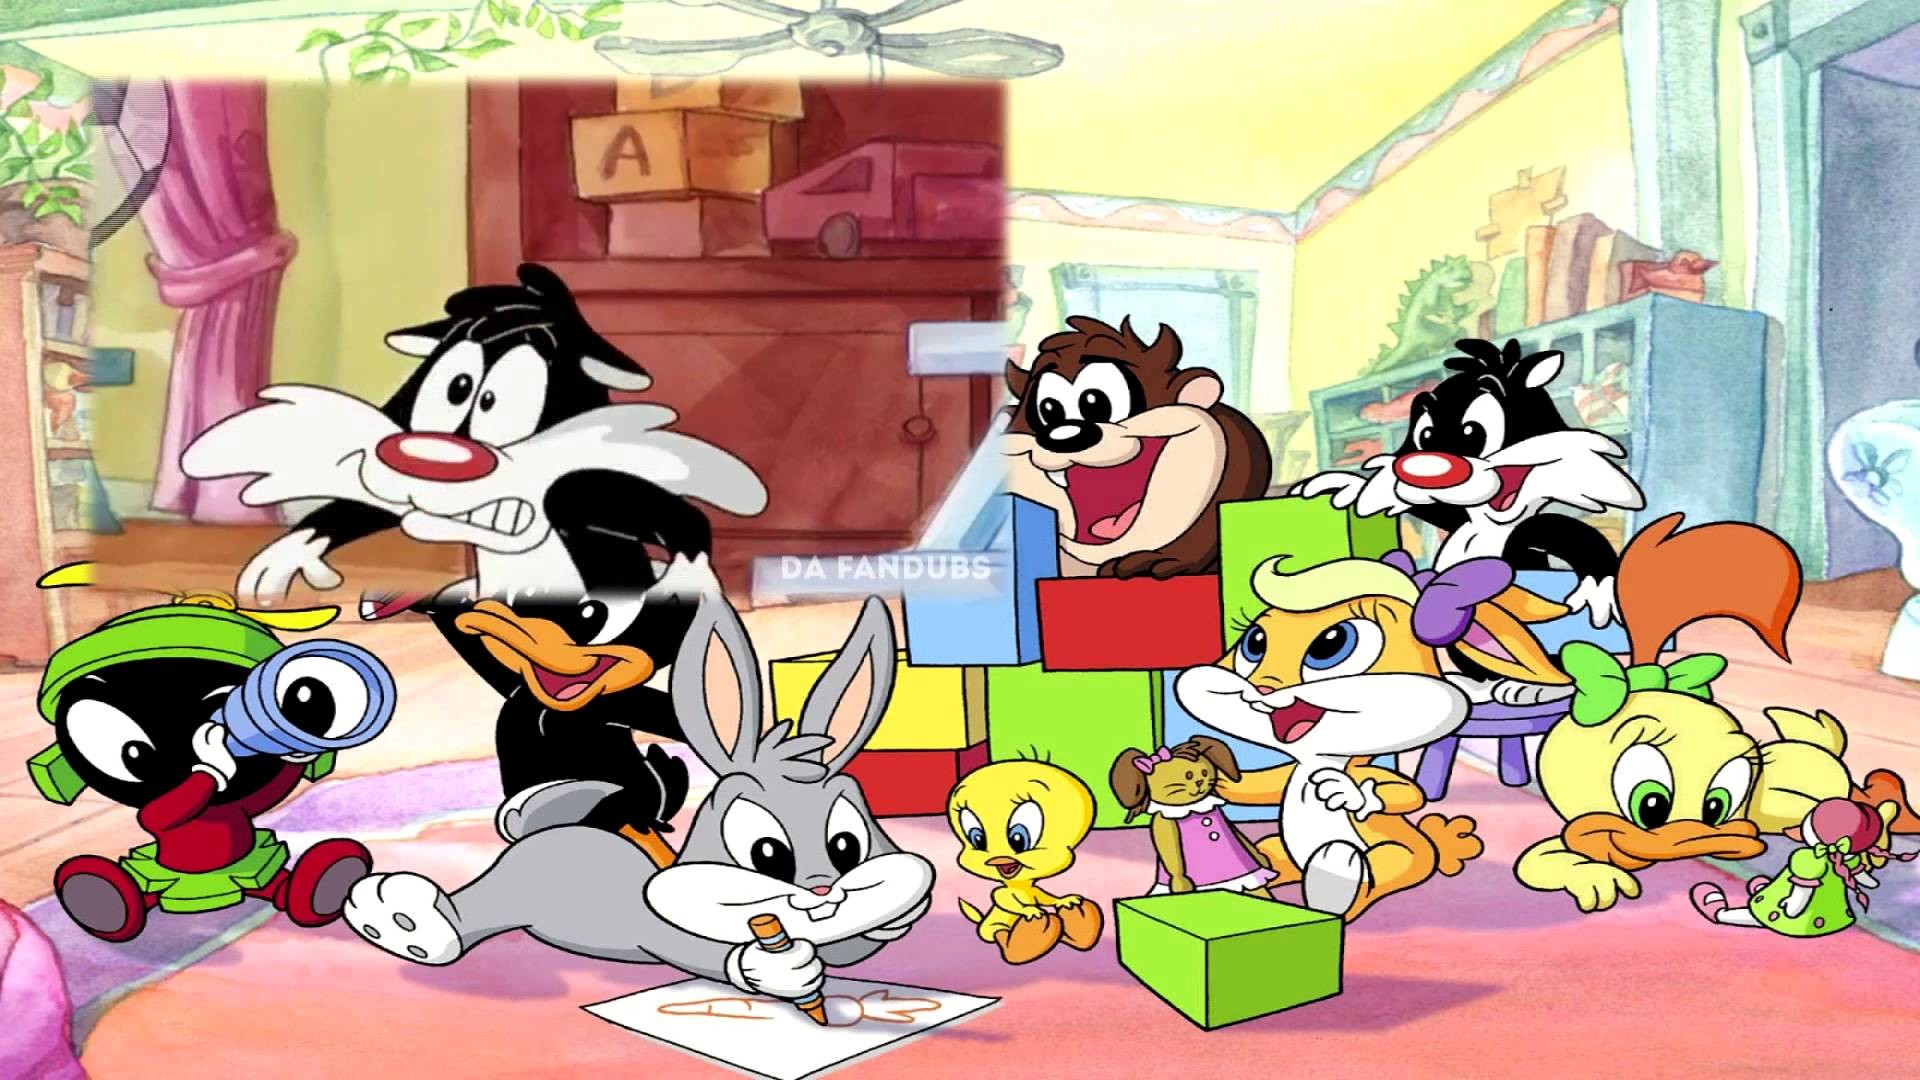 Free download Baby Looney Tunes Wallpaper 52 images [1920x1080 1920x1080